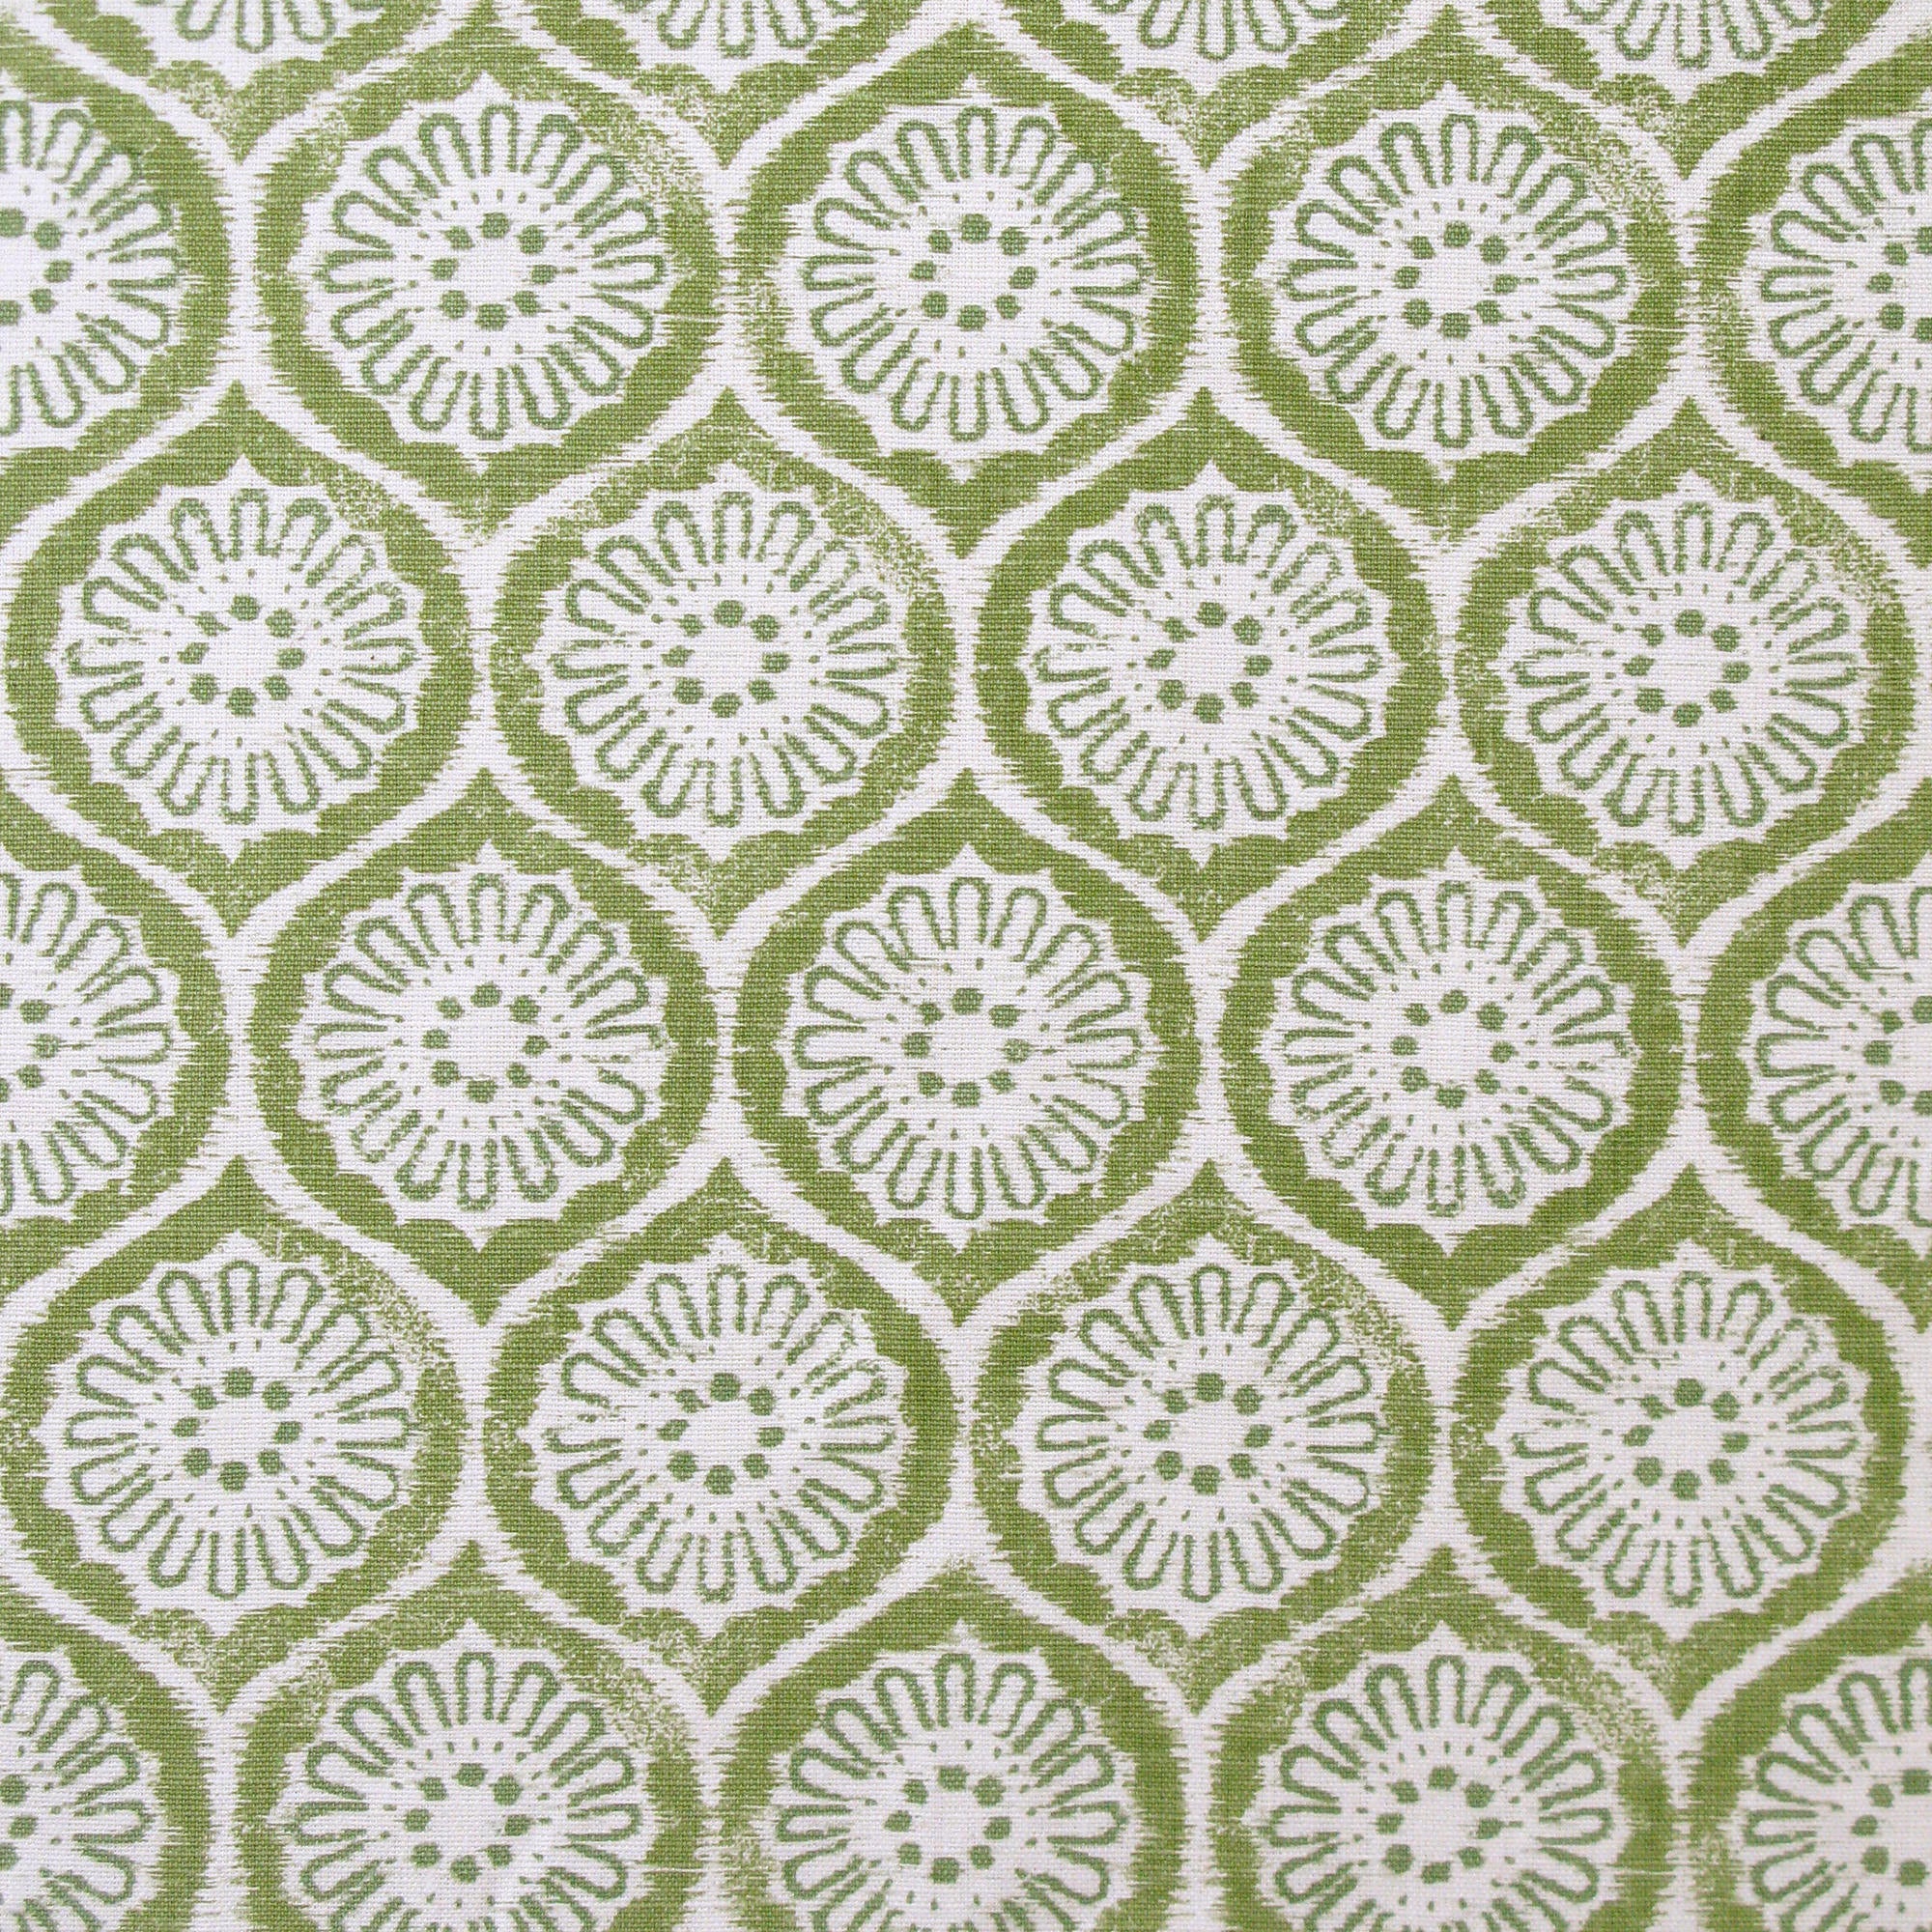 Detail of fabric in a floral lattice print in green on a cream field.